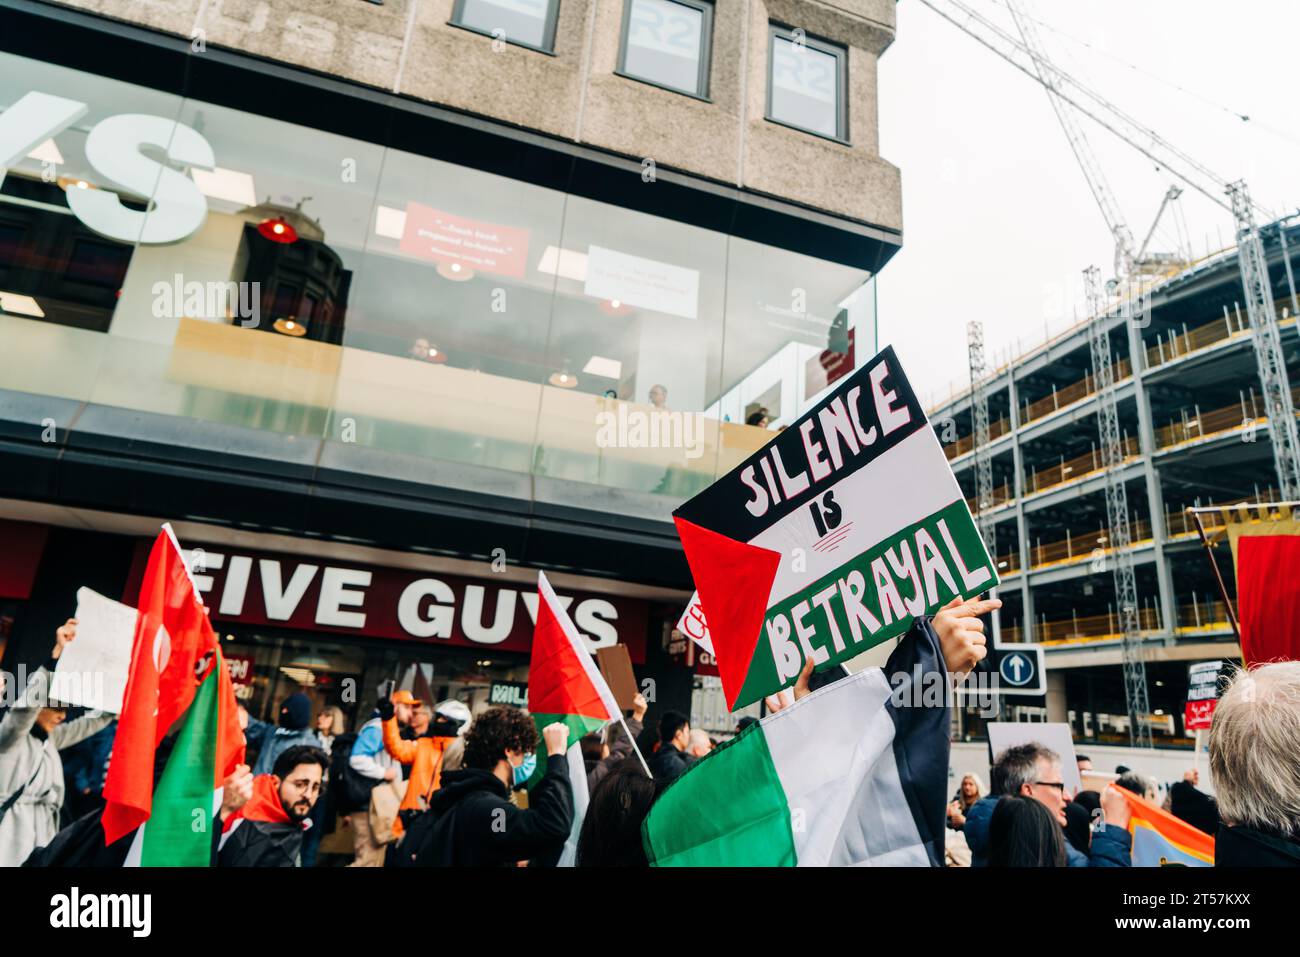 Protester holds up sign reading 'Silence is betrayal' written on Palestine flag in front of Five Guys. Newcastle Upon Tyne, England, UK - Oct 28 2023. Stock Photo